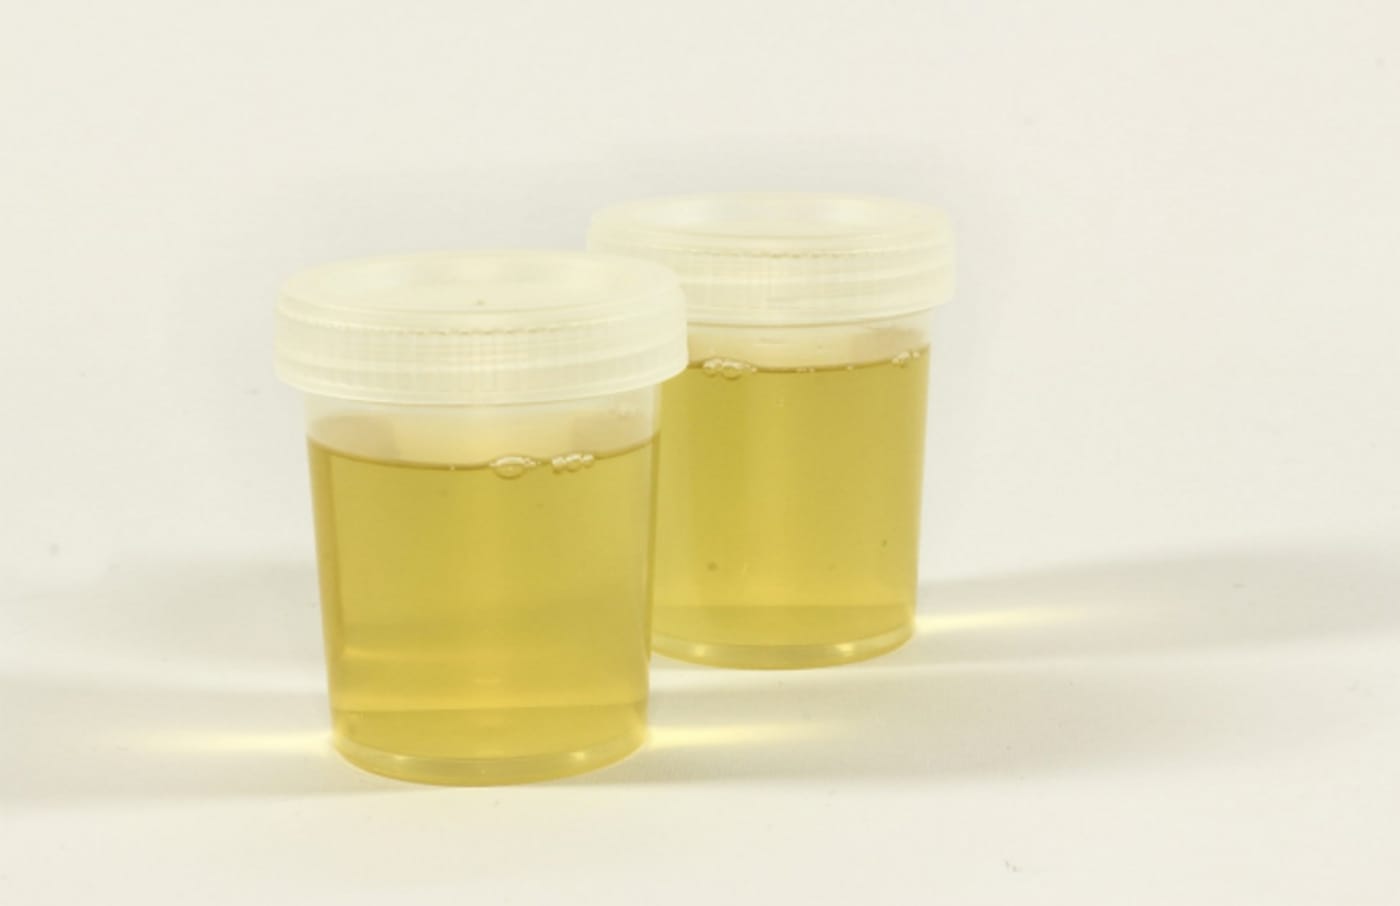 This is urine.